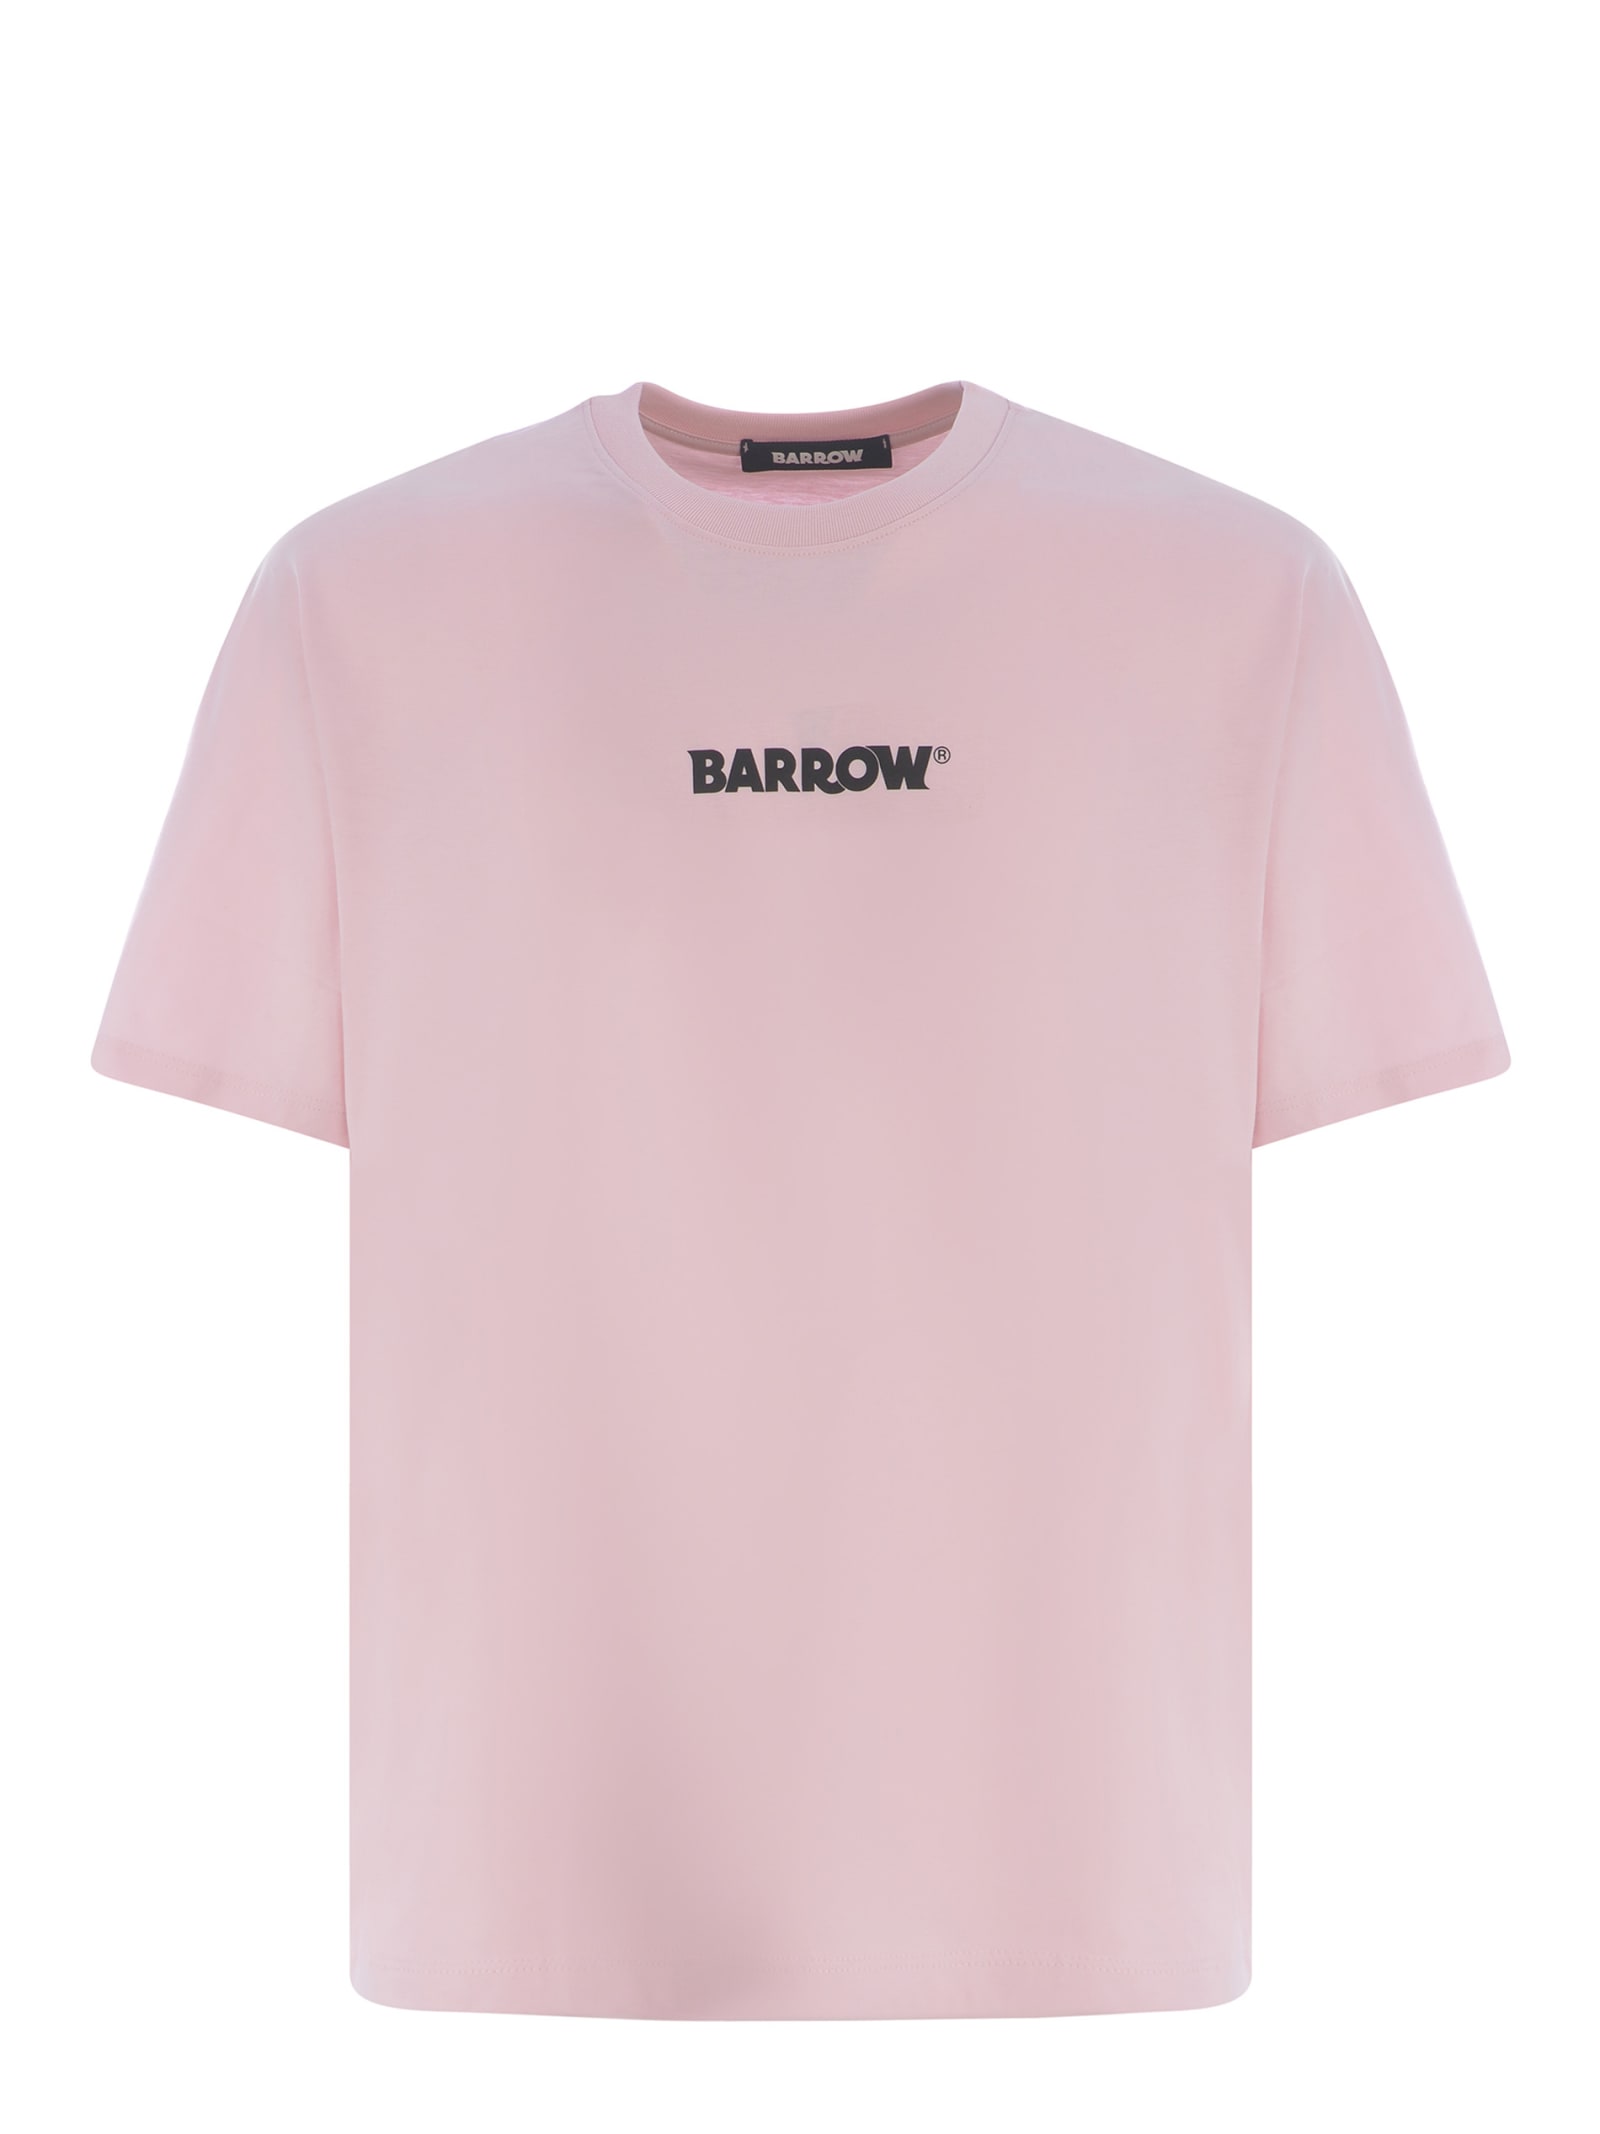 Barrow T-shirt  Smile Made Of Cotton In Pink